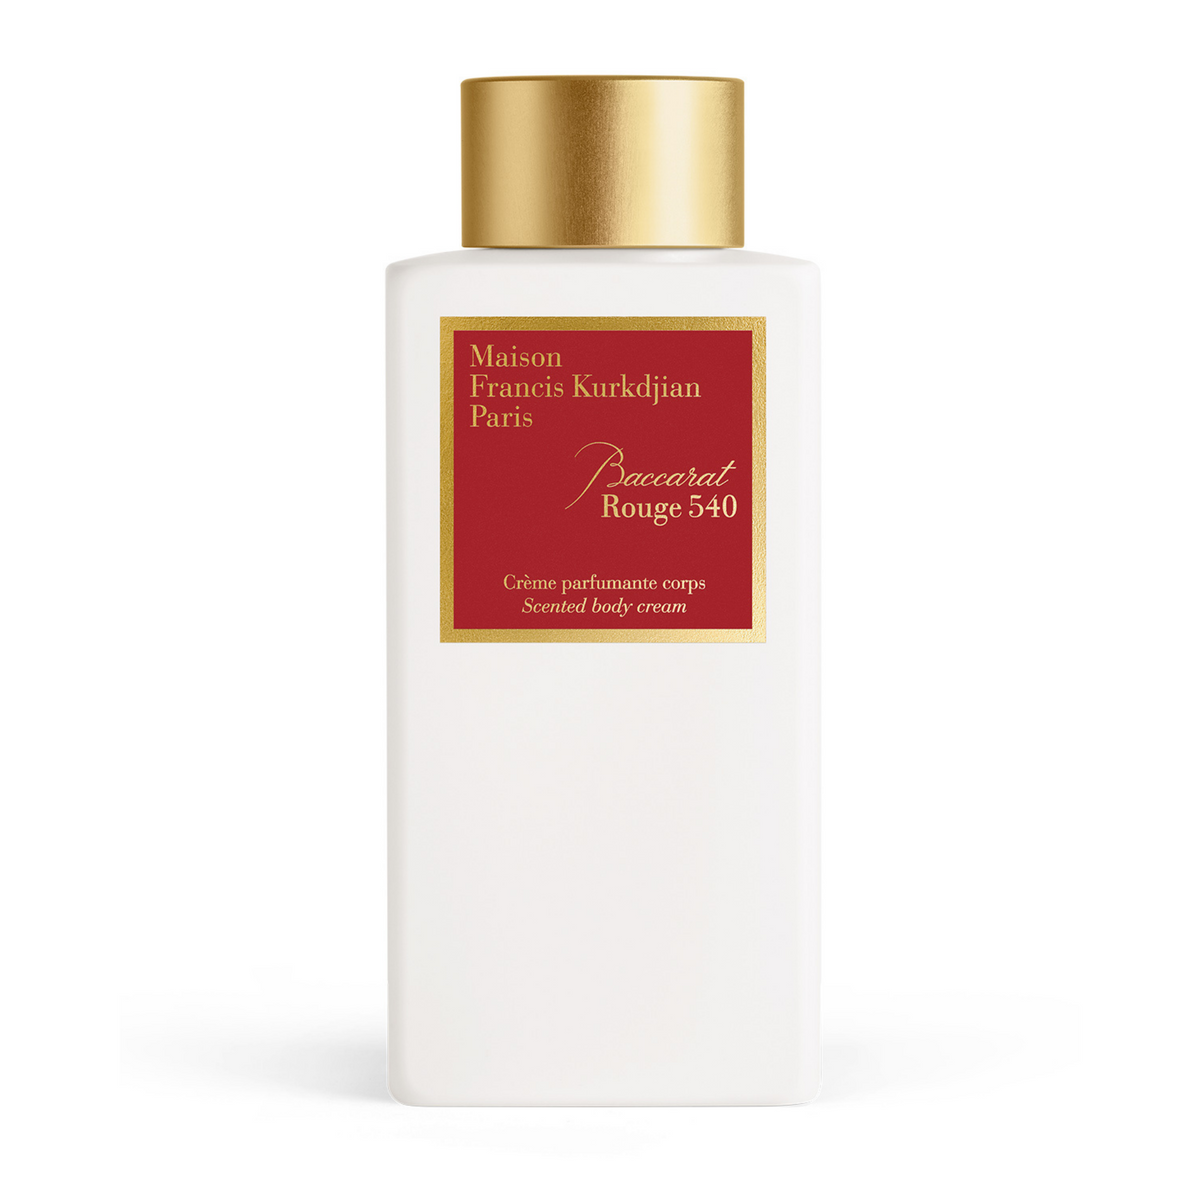 Primary image of Baccarat Rouge 540 Body Cream